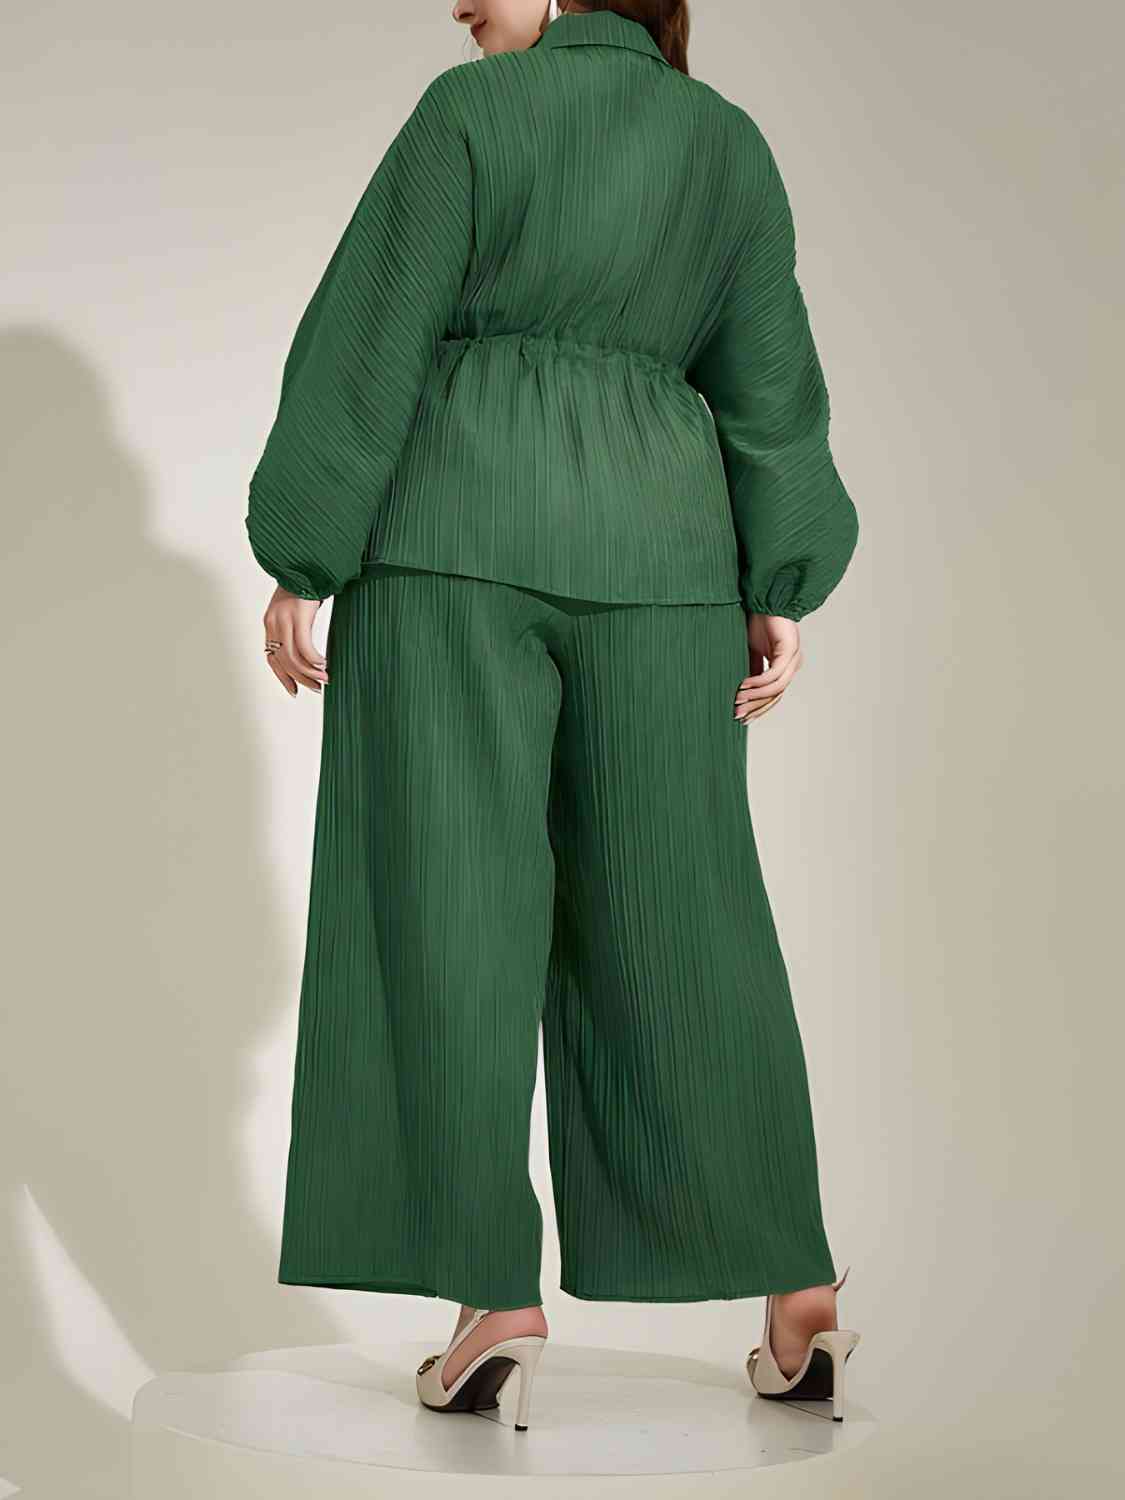 Plus Size Collared Neck Buttoned Top and Wide Leg Pants Set - Pahabu